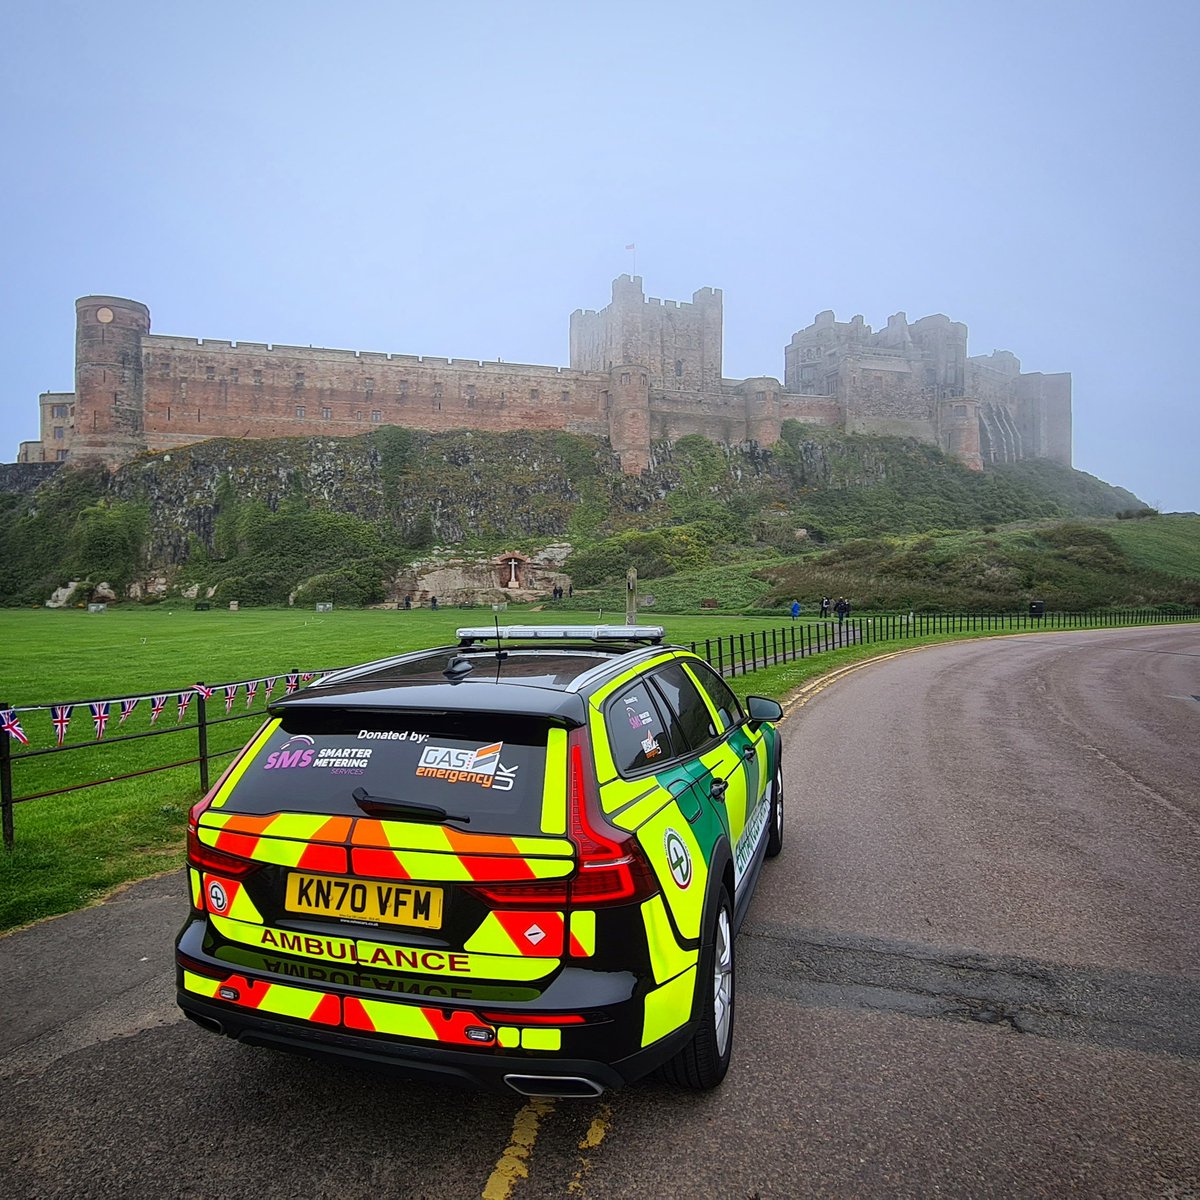 A weekend of volunteering for our team across the north of our region.

Thanks to @Smarterm3tering and @gas_emergency_uk

#volunteer #charity #thebighelpout #bamburgh #thelastkingdom #bebbanburg #northumberland #northeastengland  #northumberlandcoast @volvocaruk @jeanettegriggs